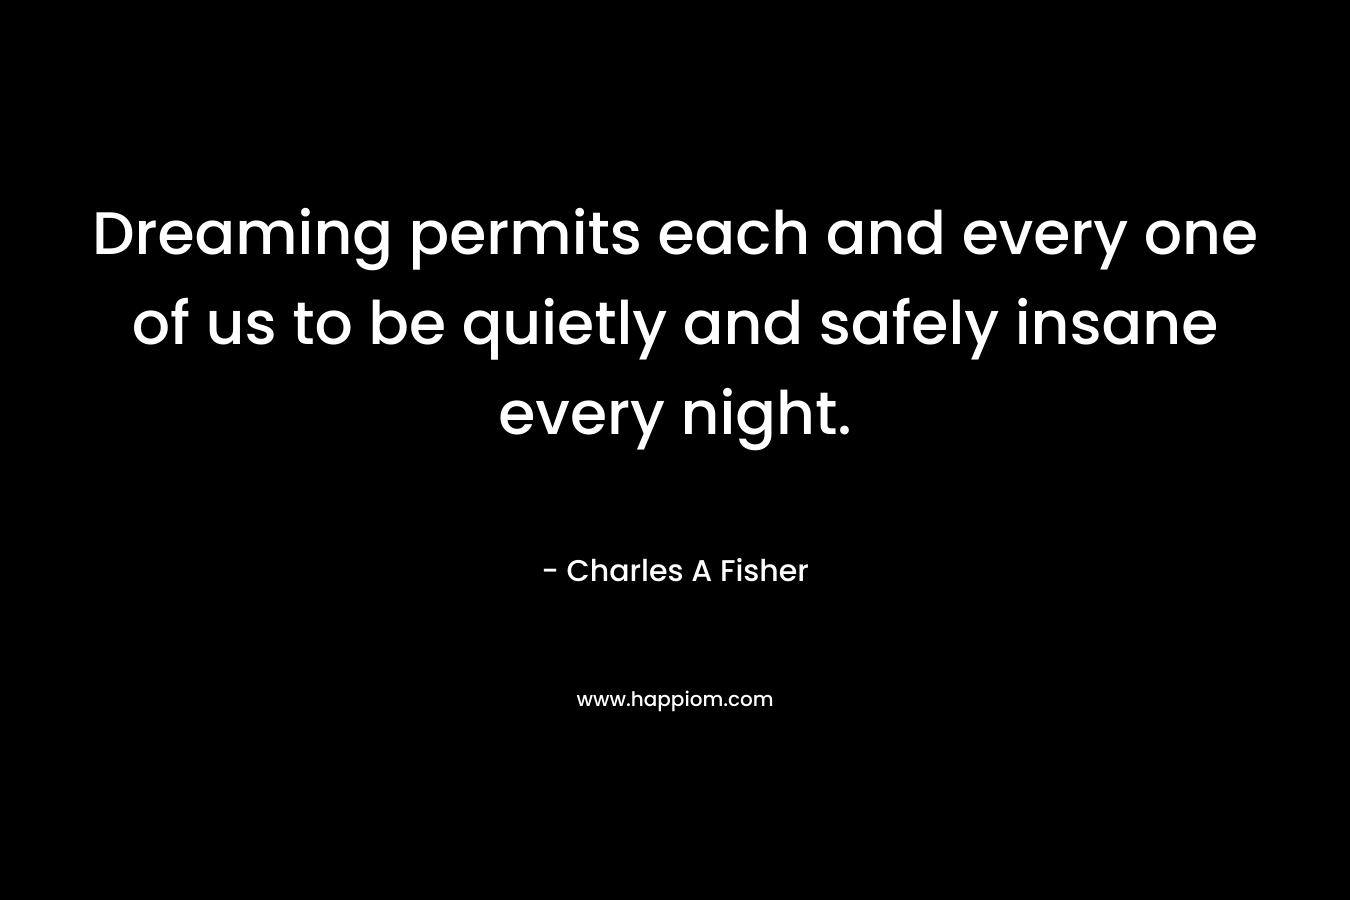 Dreaming permits each and every one of us to be quietly and safely insane every night.